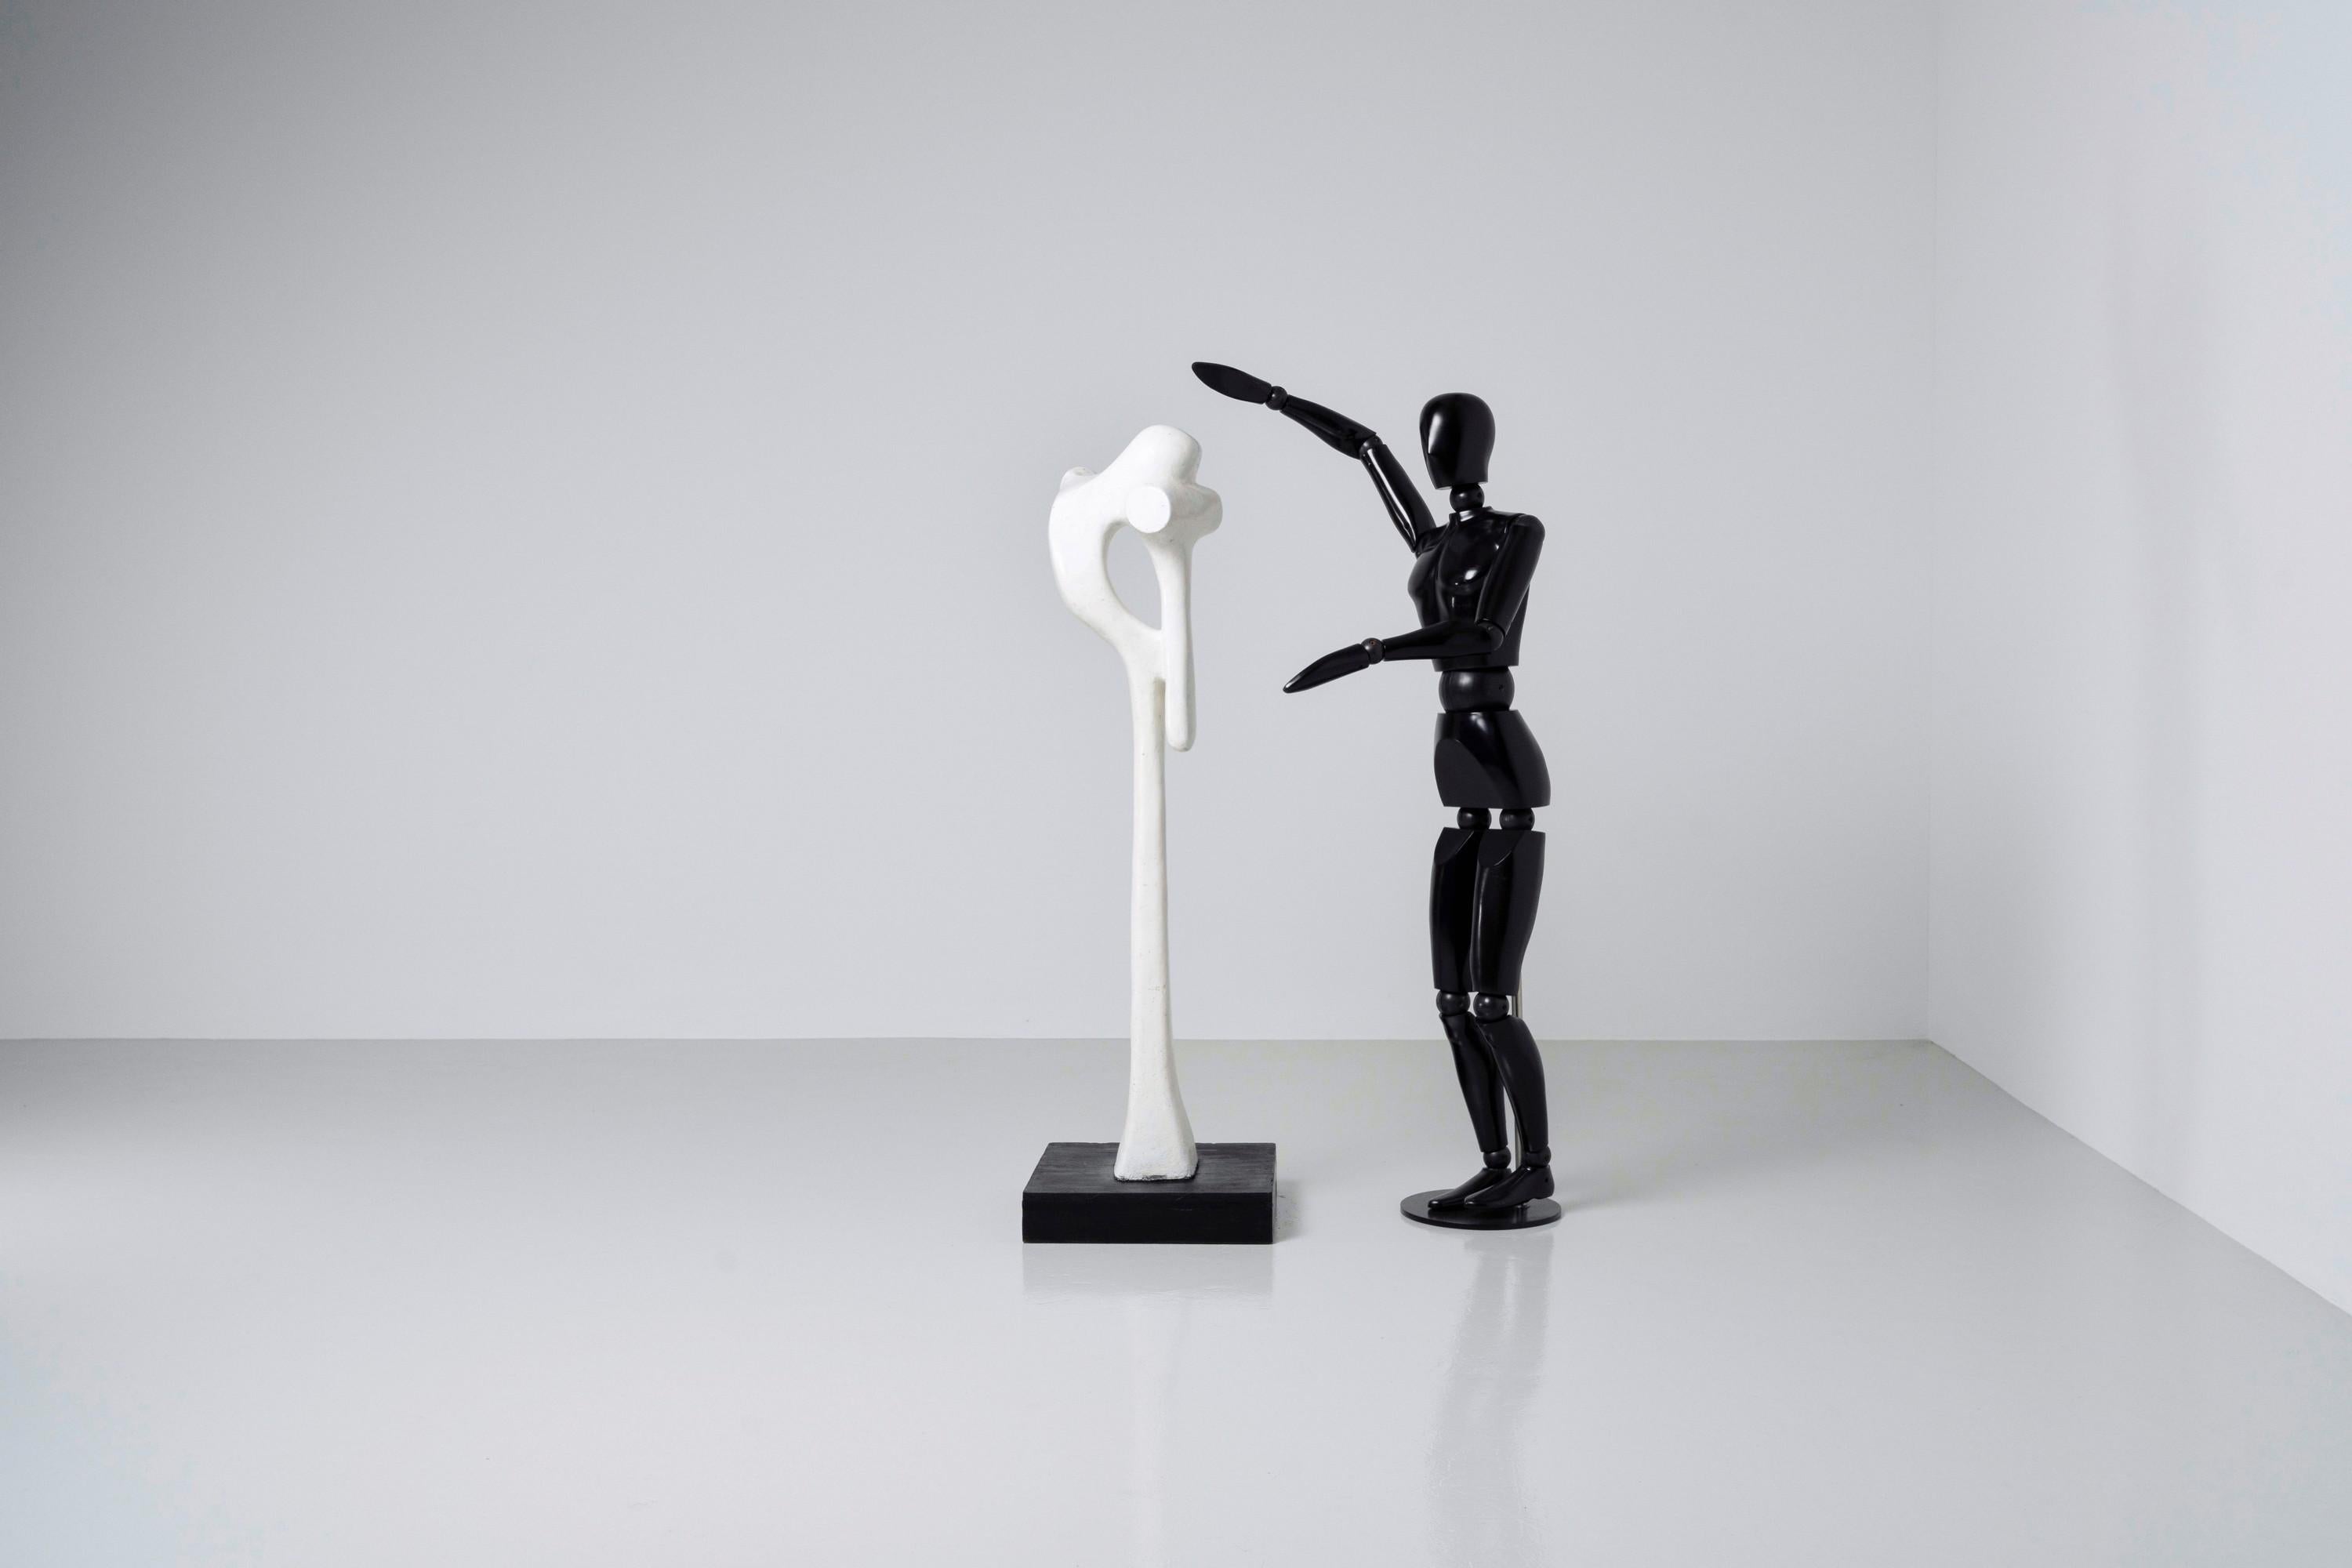 Intruiging and tall sculpture made by Dutch artist Hans van Eerd in 1974.  The sculpture is made of painted plaster and stands on a black ebonized wooden base. This piece looks great in any style of interior but can be used outdoors as well, since